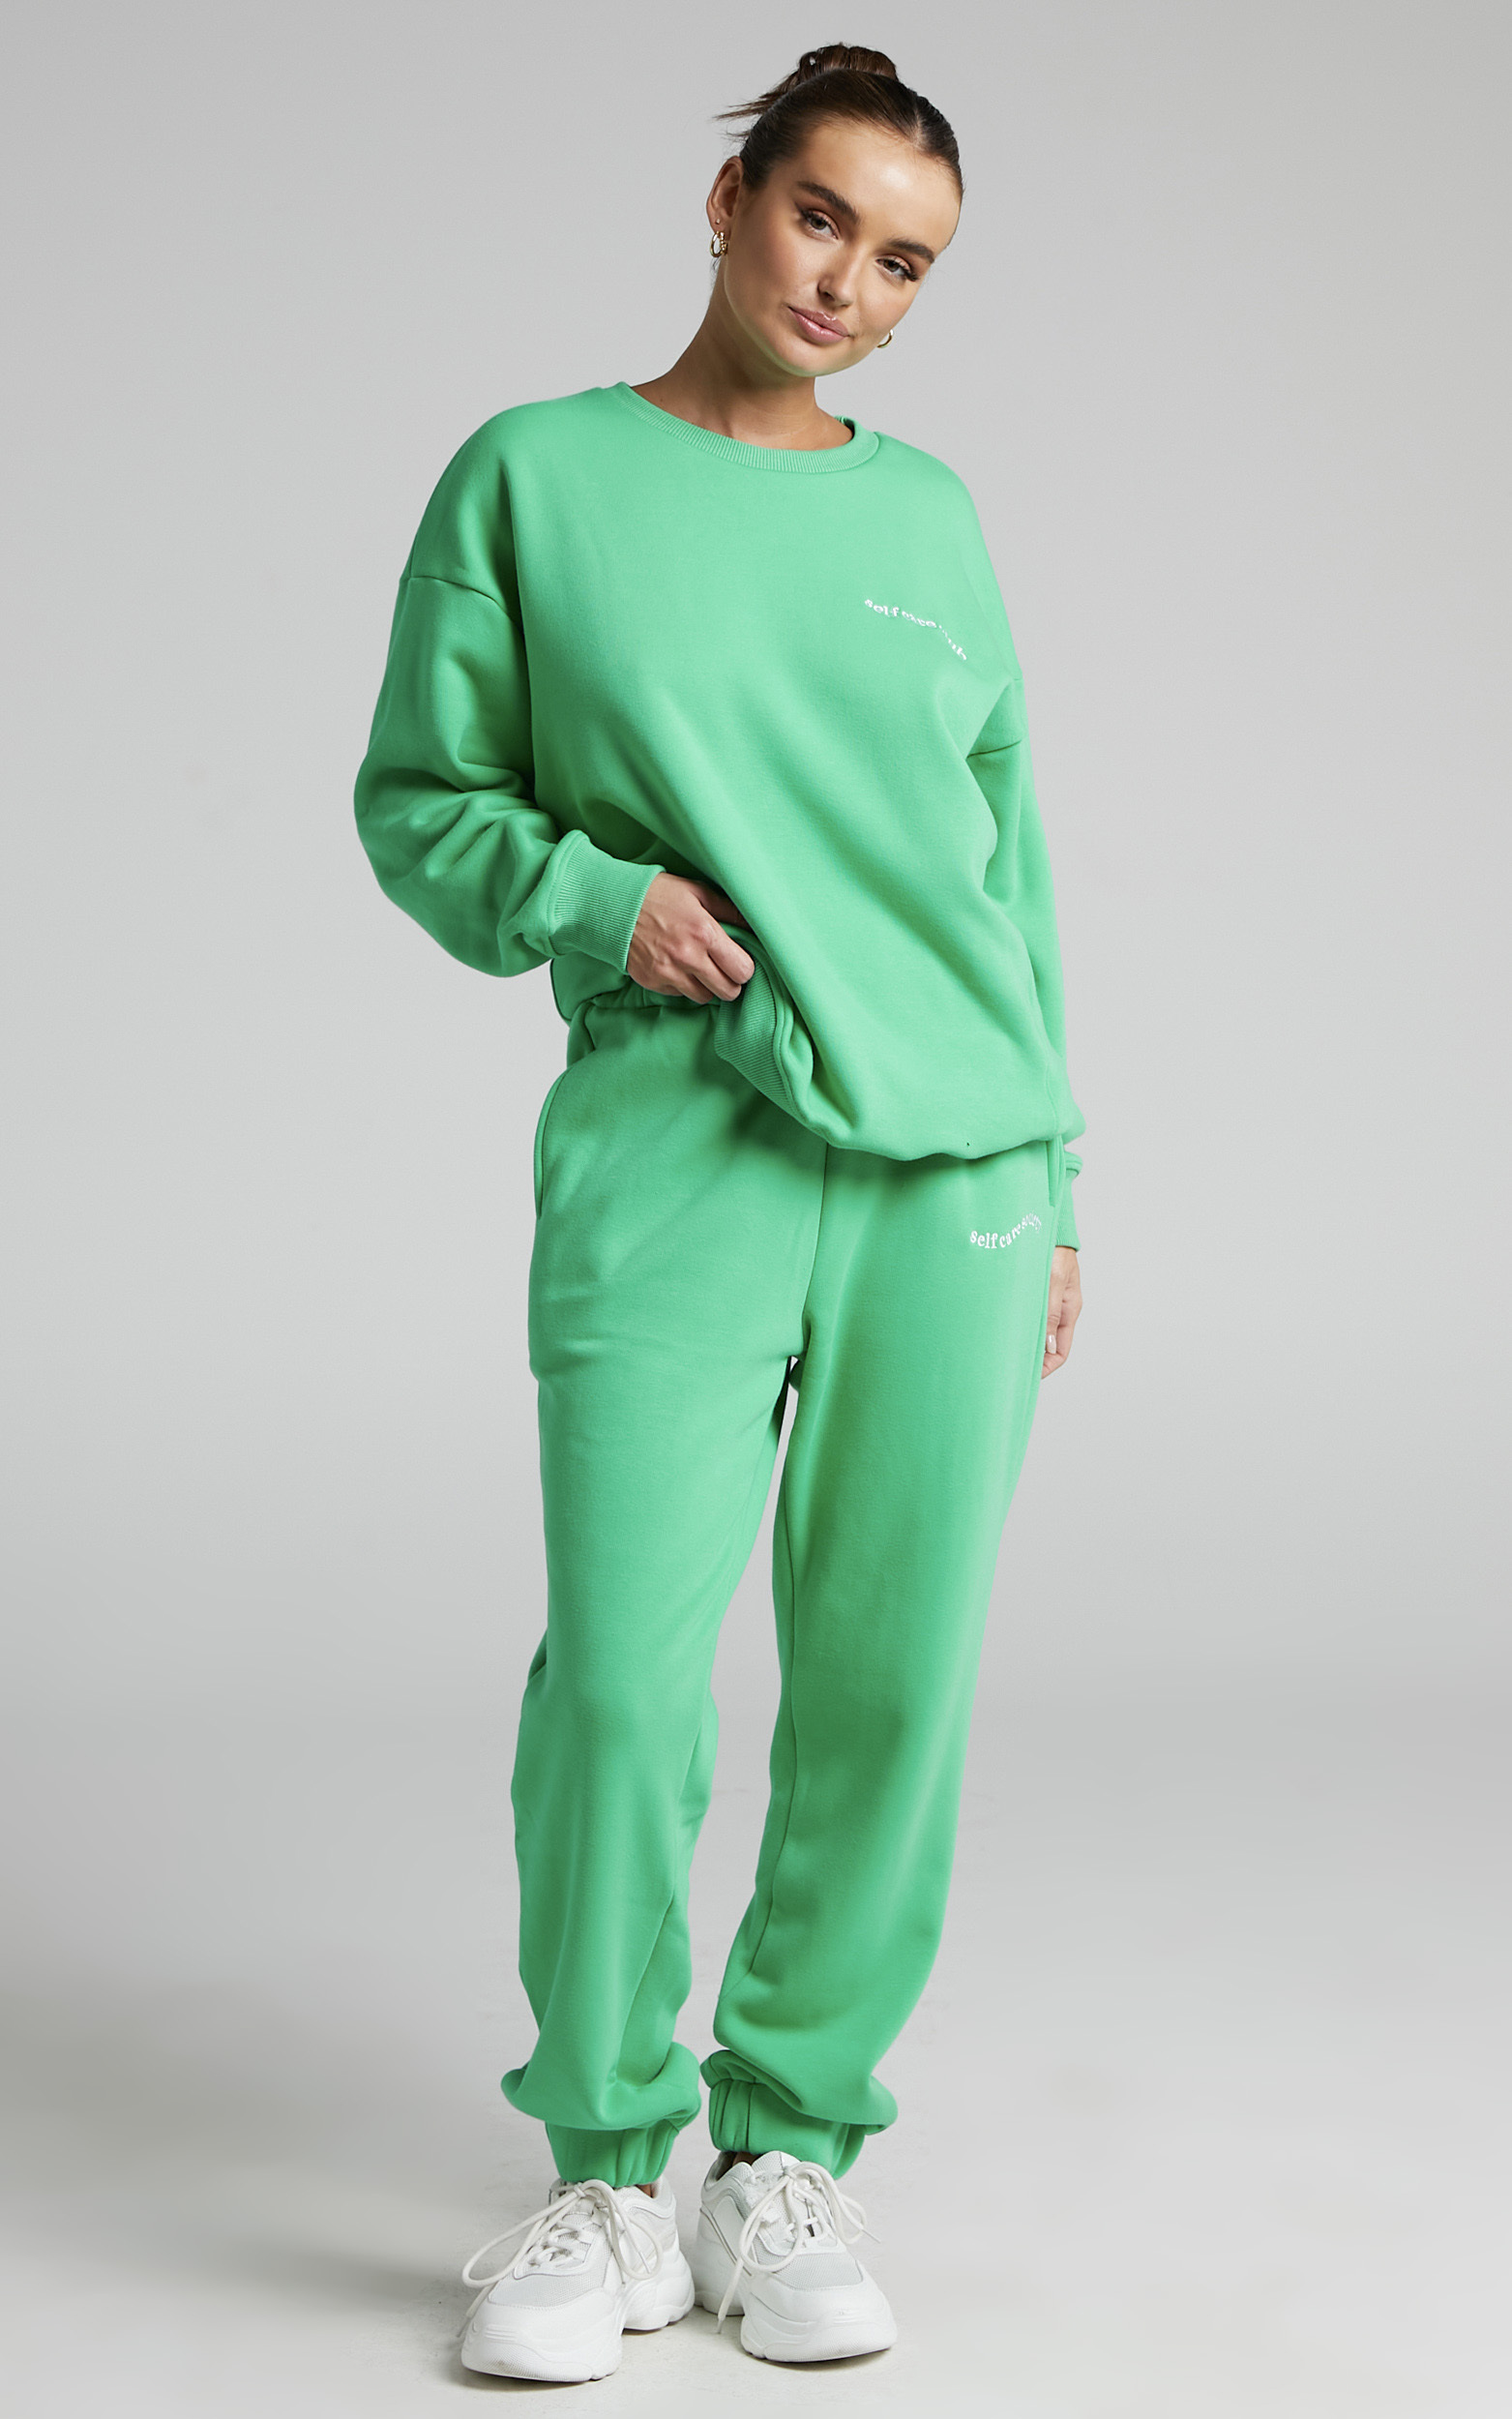 Sunday Society Club - Maddie Sweatpants in Apple Green - 04, GRN5, hi-res image number null